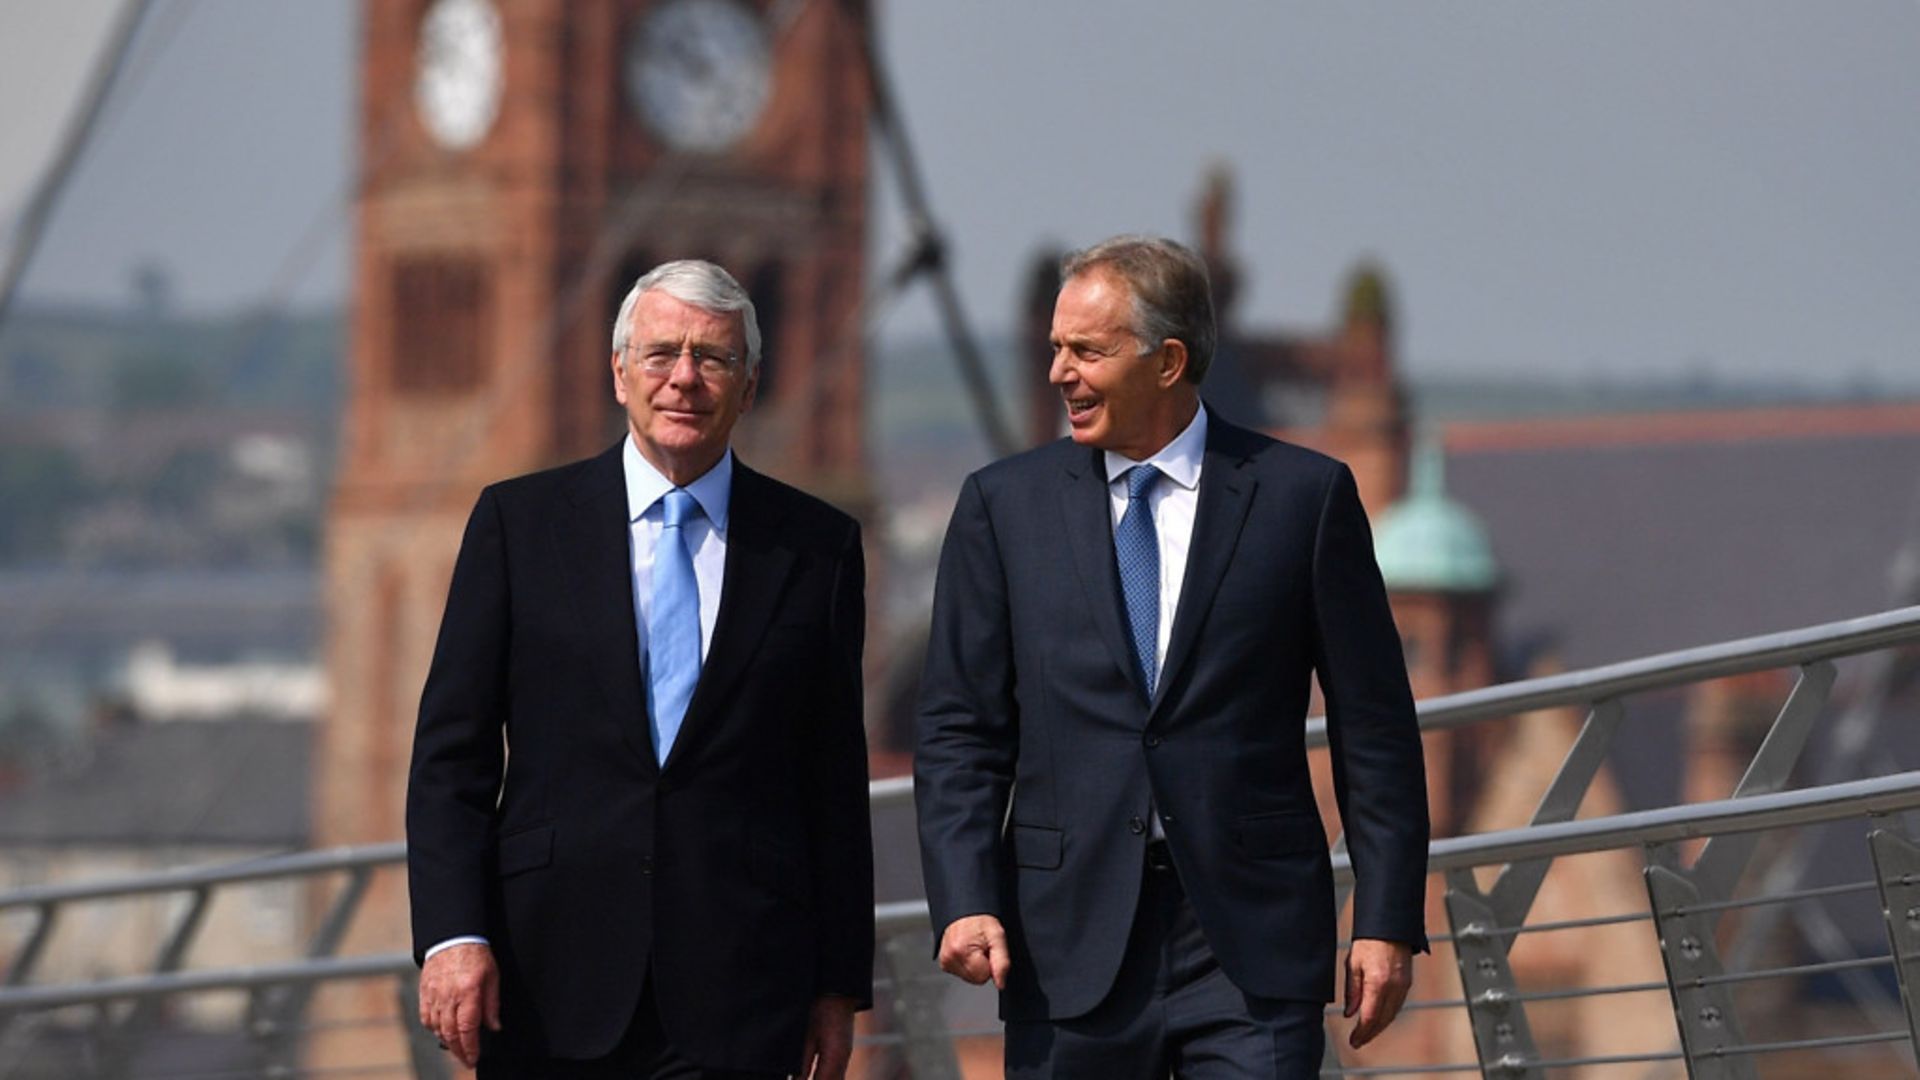 Former prime ministers Sir John Major (left) and Tony Blair walk across the Peace Bridge in Londonderry - Credit: PA Archive/PA Images